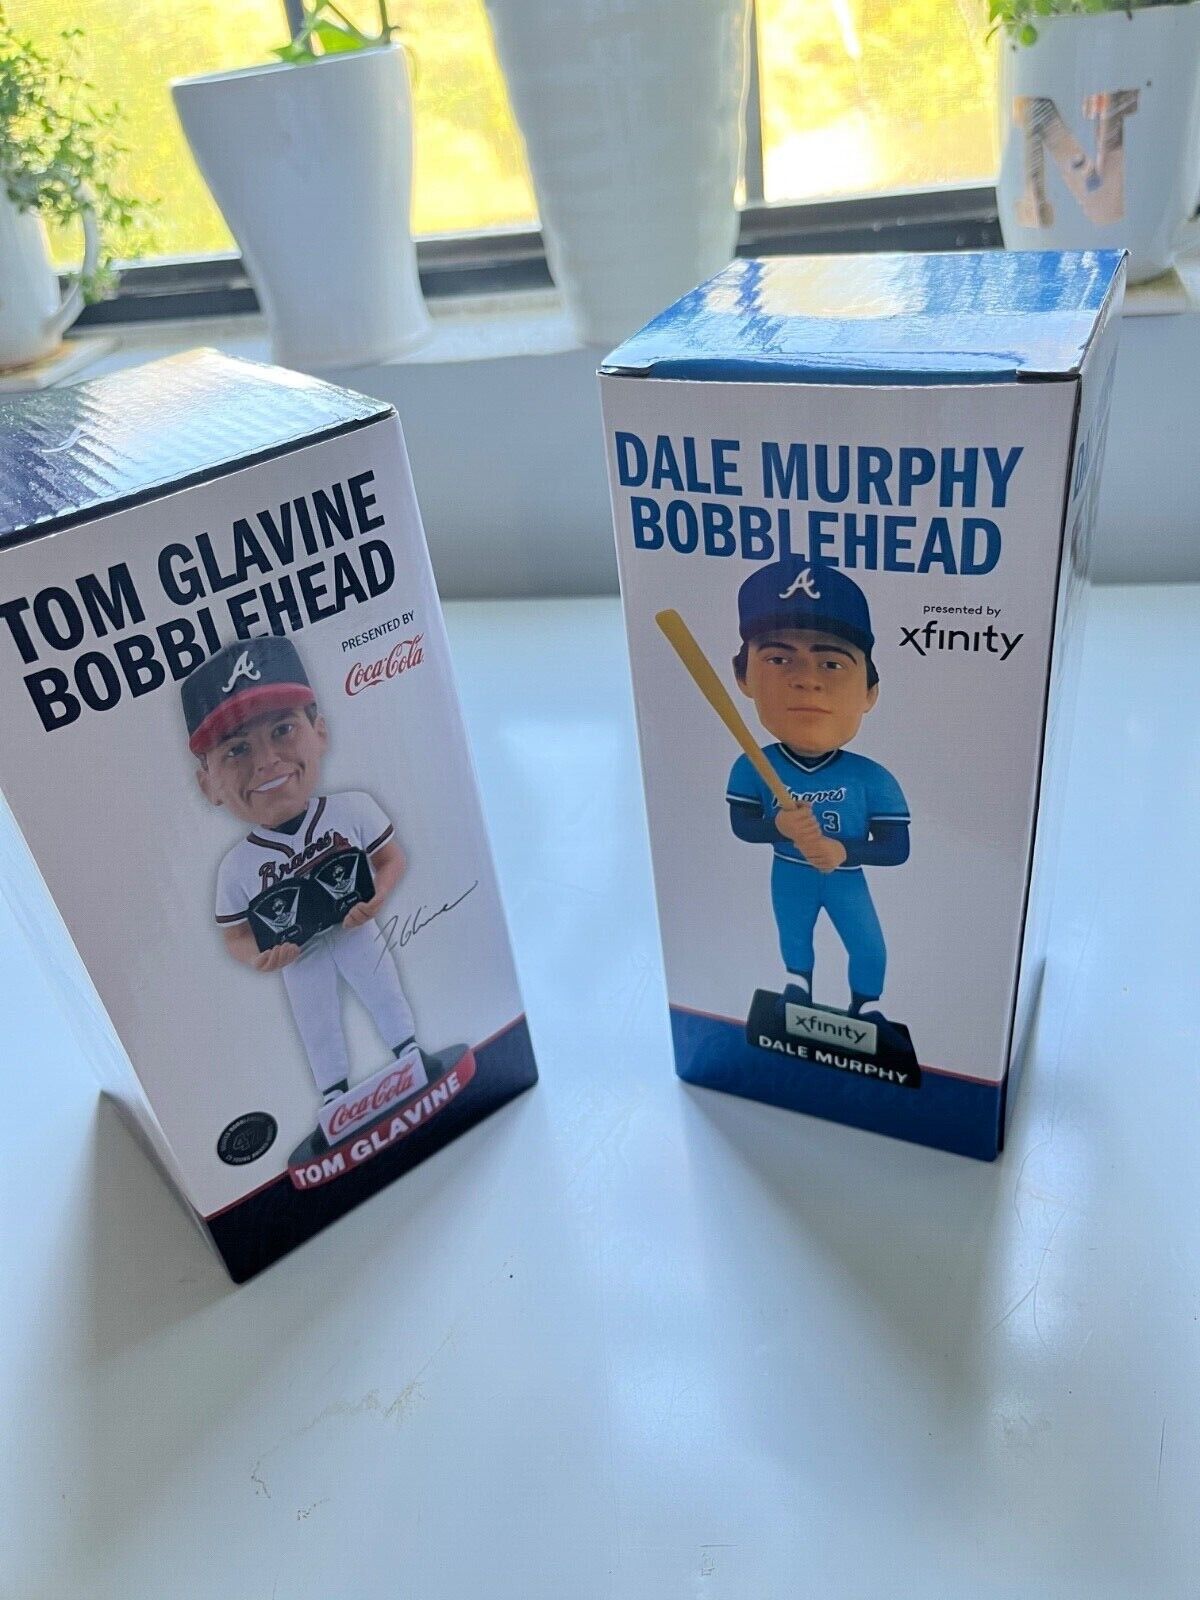 Tom Glavine & Dale Murphy sports bobbleheads in collectables 2 for 1 deal